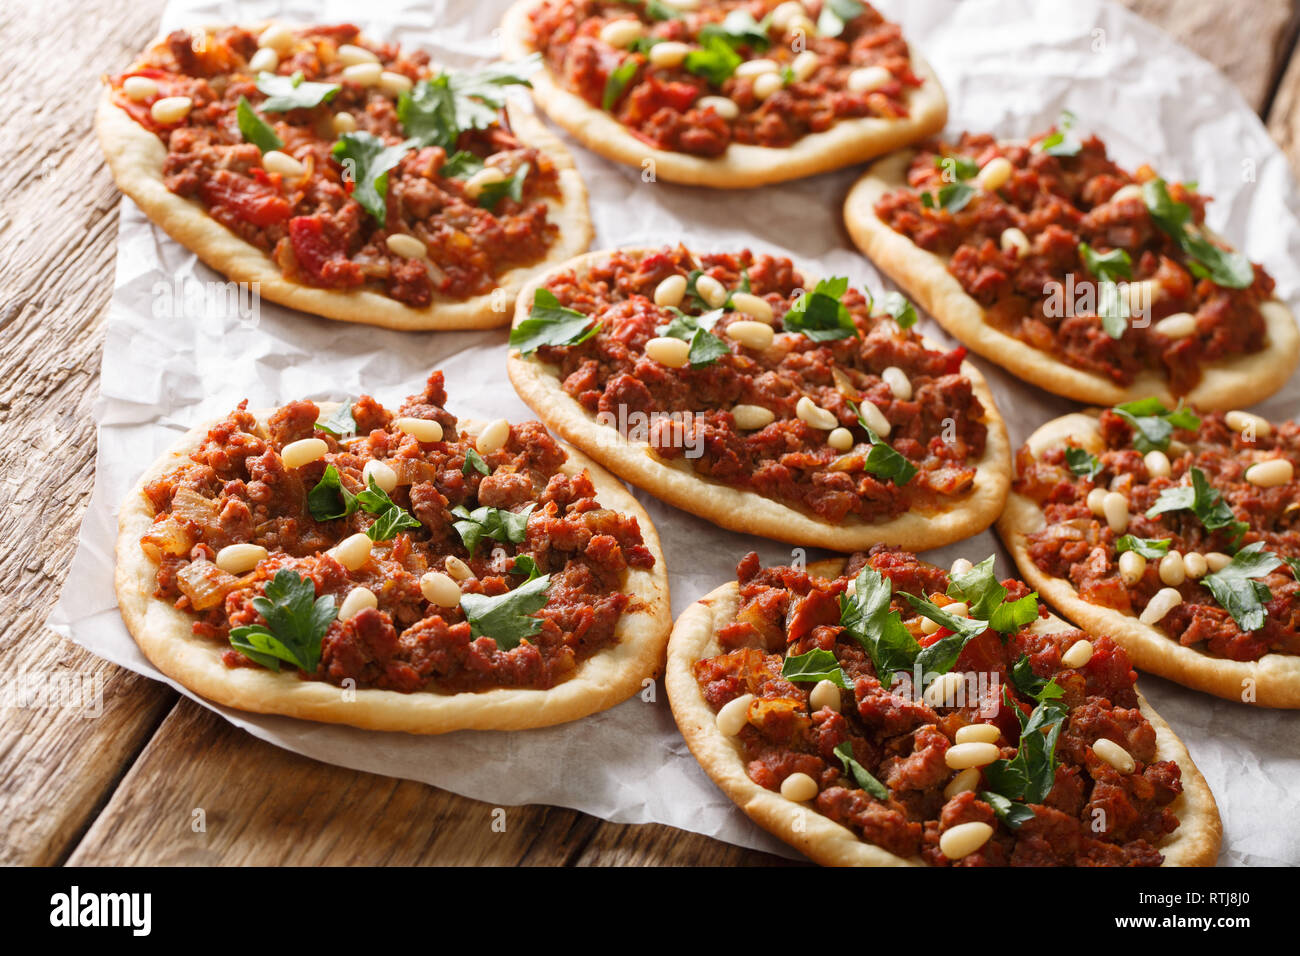 Arab mini pizza with minced meat, tomatoes, onions, spices and pine nuts closeup on the table. horizontal Stock Photo